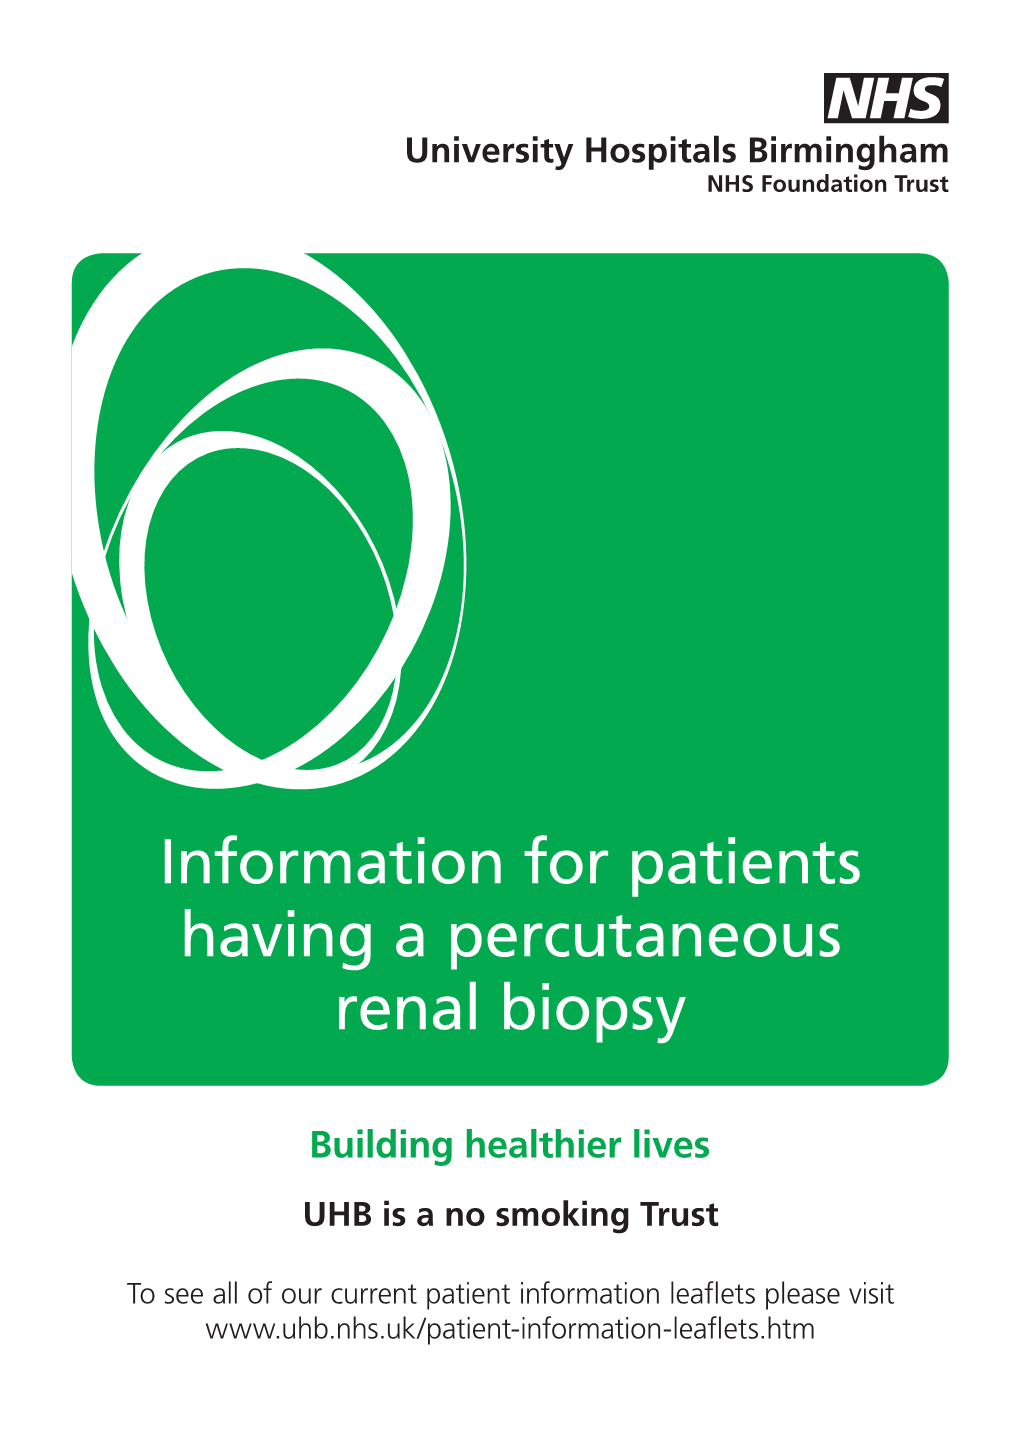 Information for Patients Having a Percutaneous Renal Biopsy